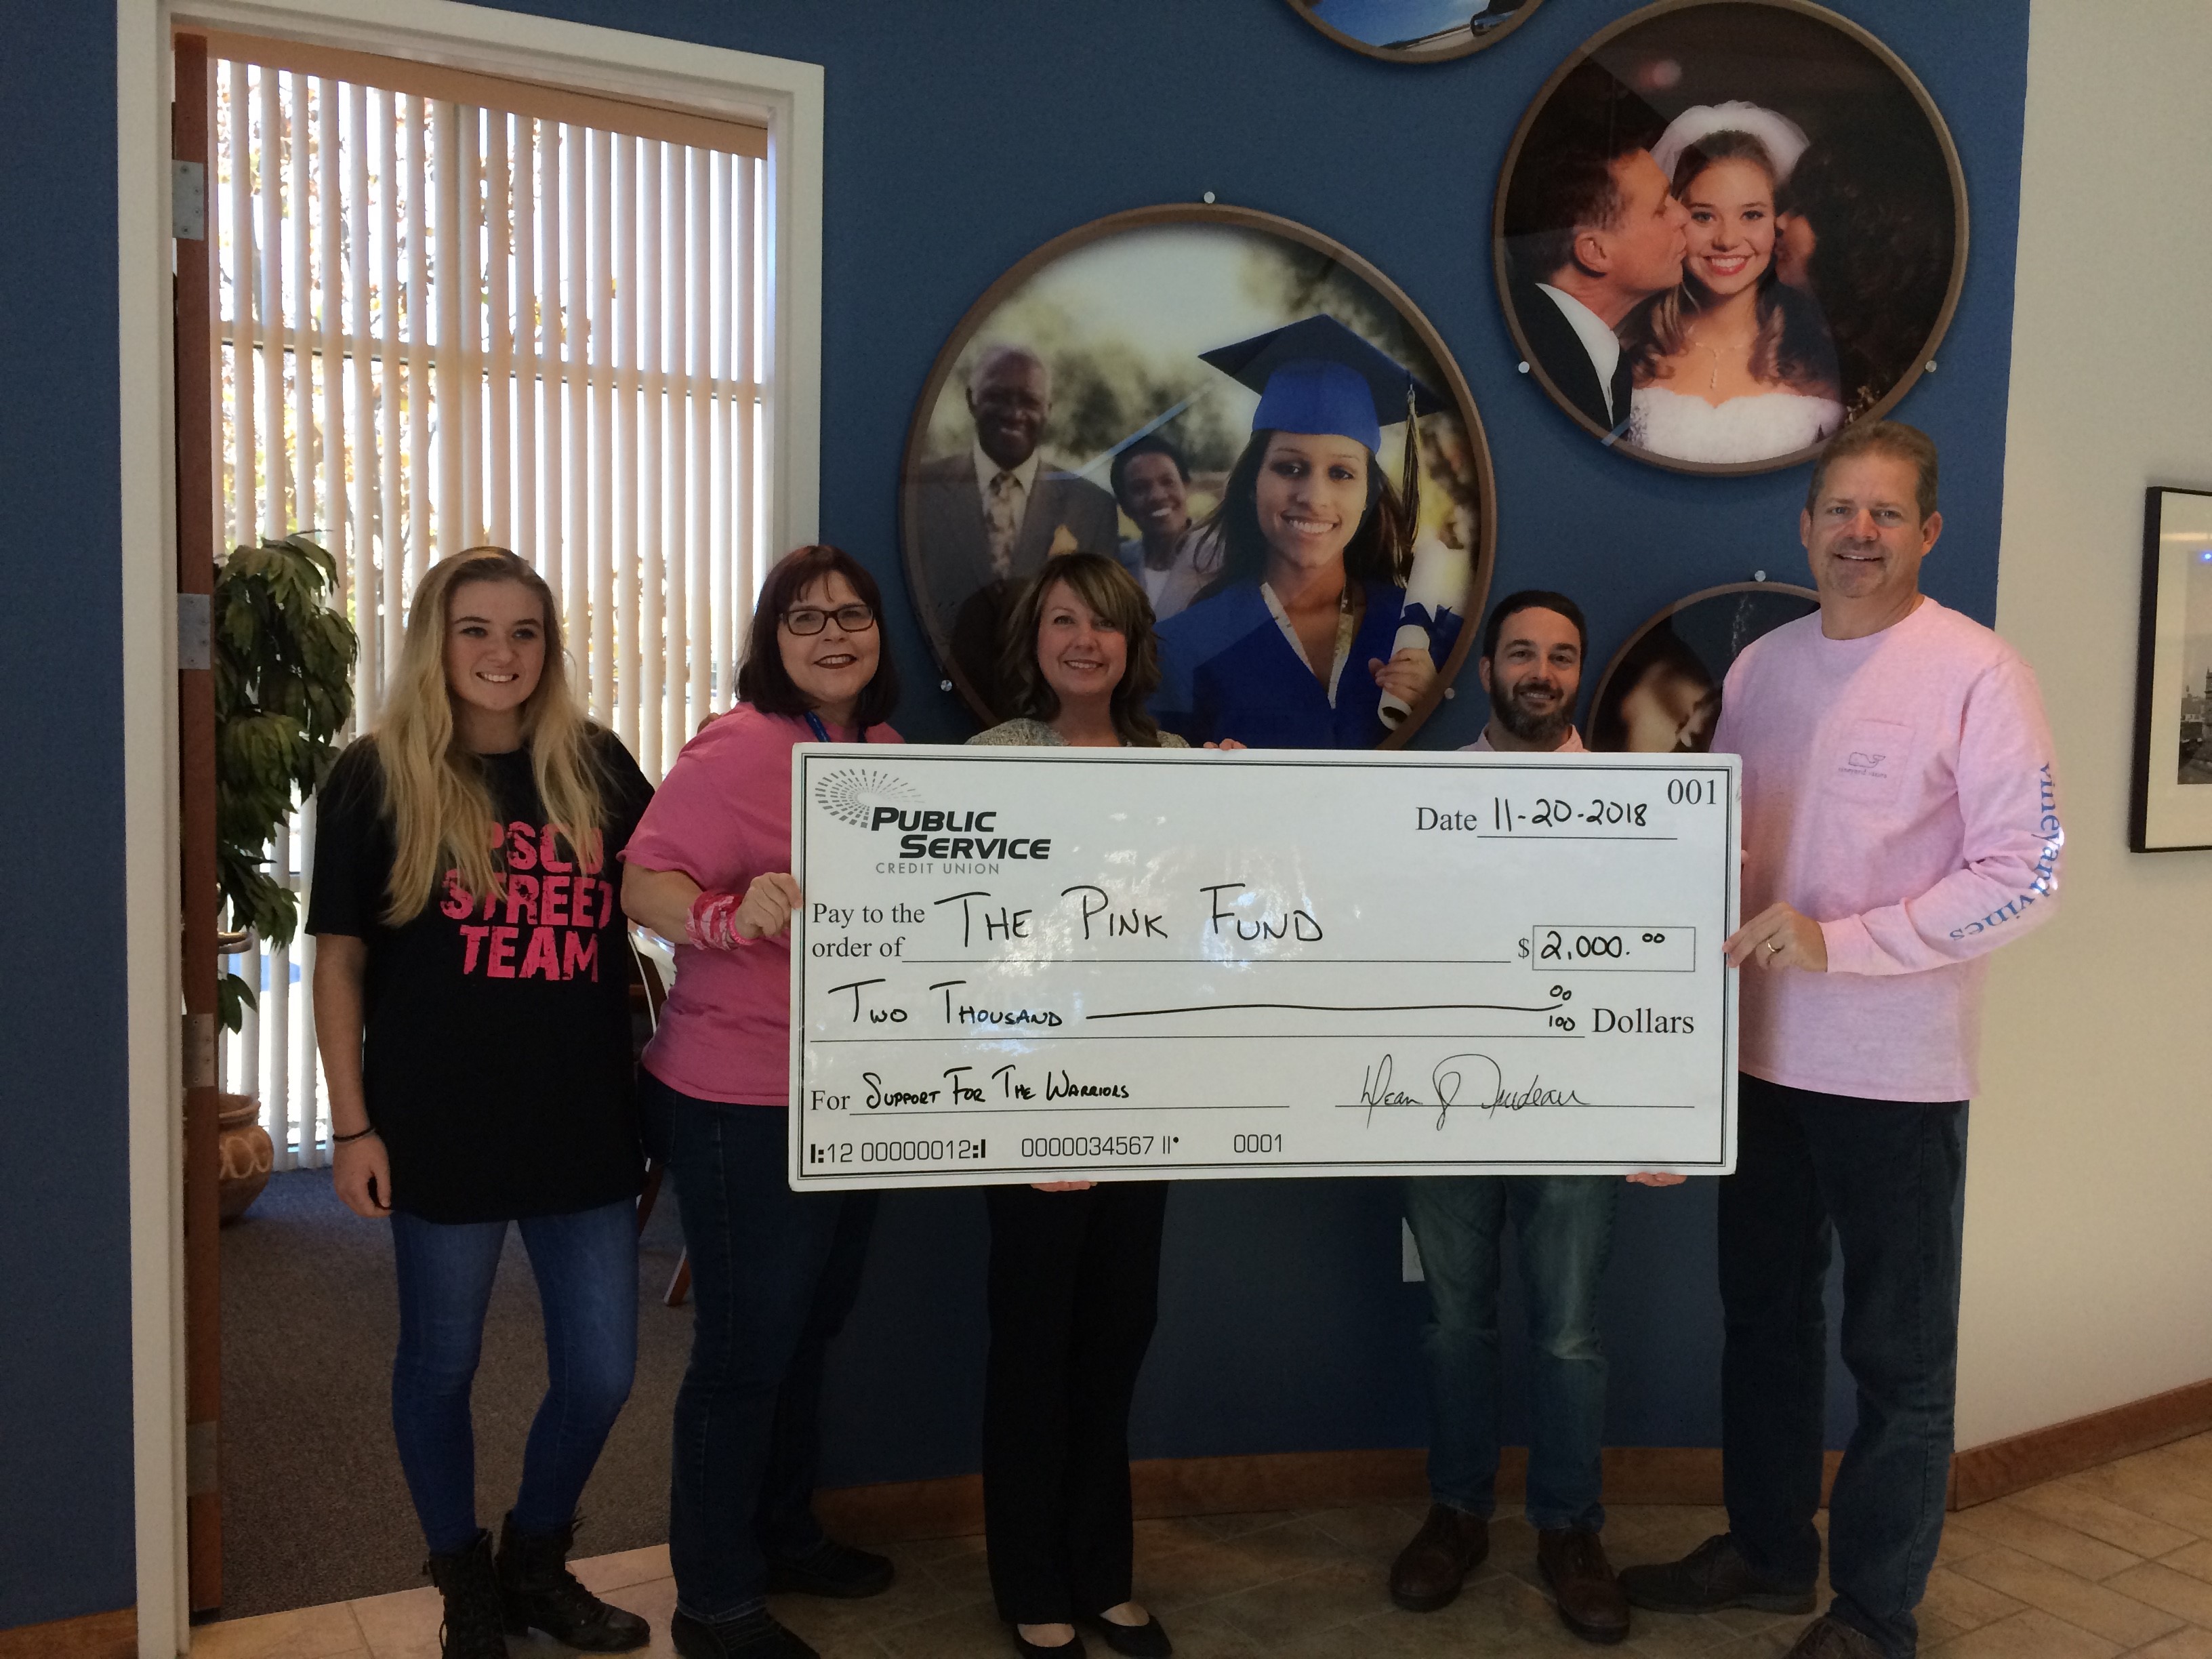 PSCU Donates $2,000 to the Pink Fund